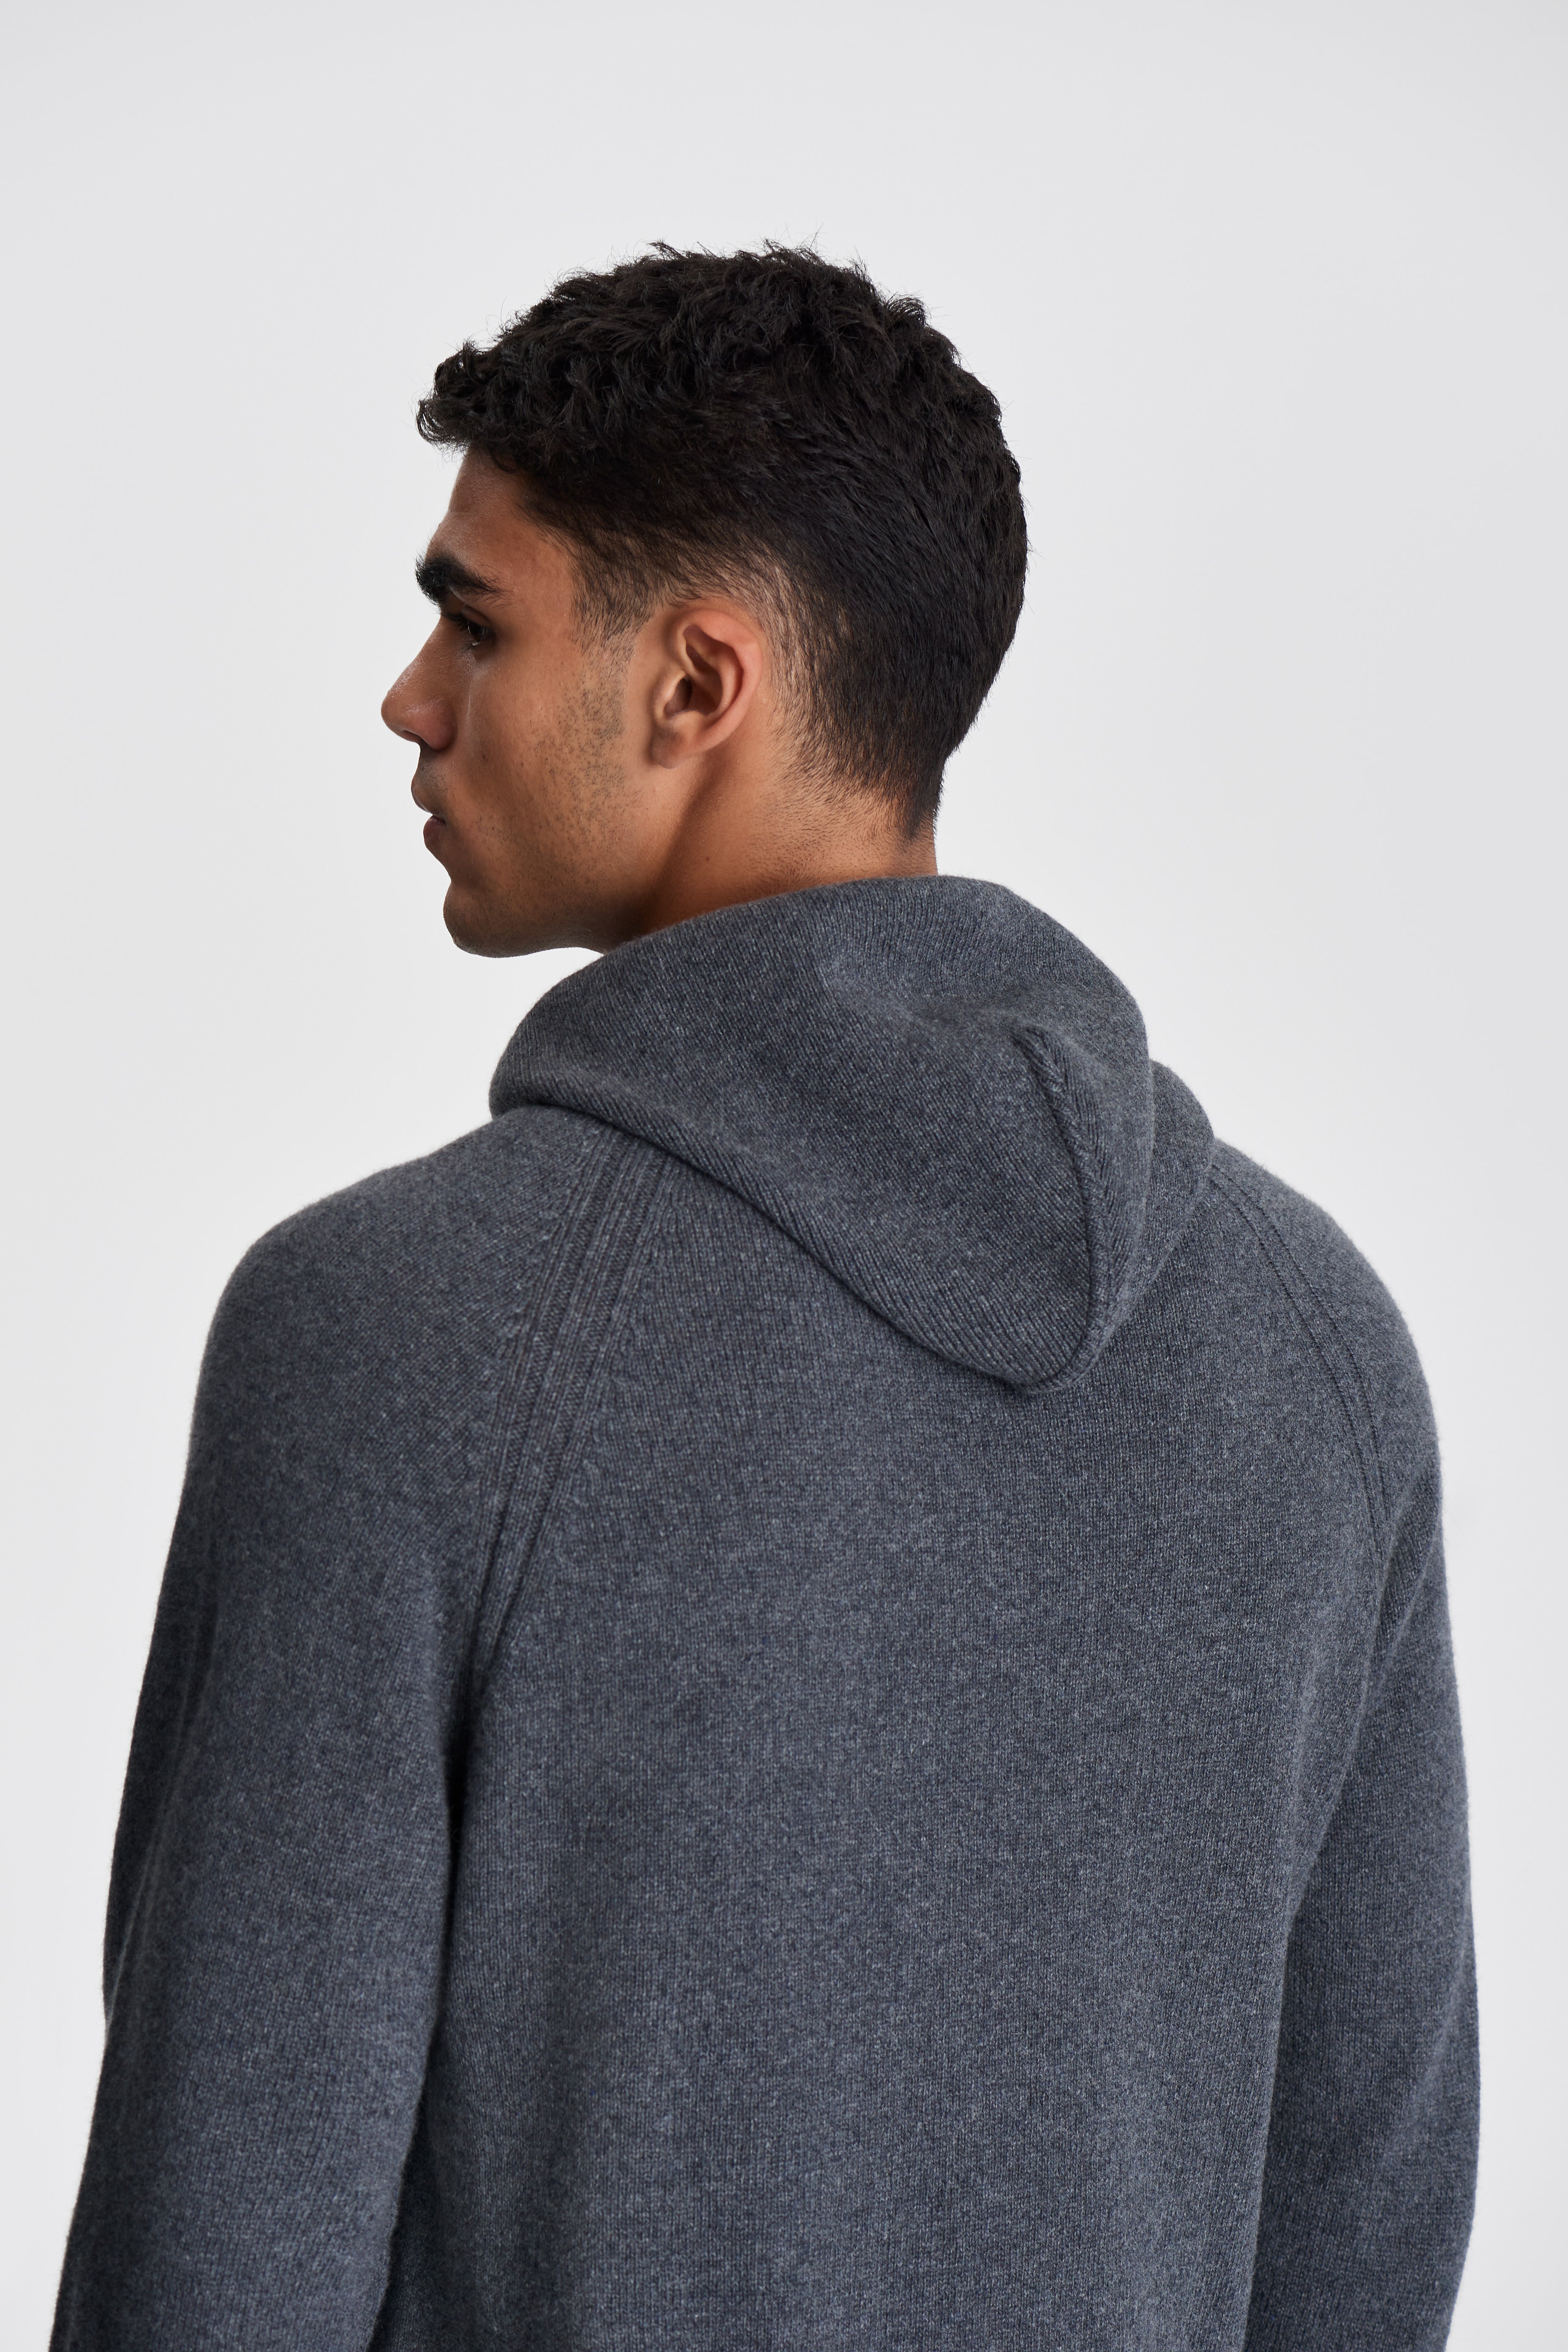 Cashmere Pullover Hoodie Grey Model Hood Image